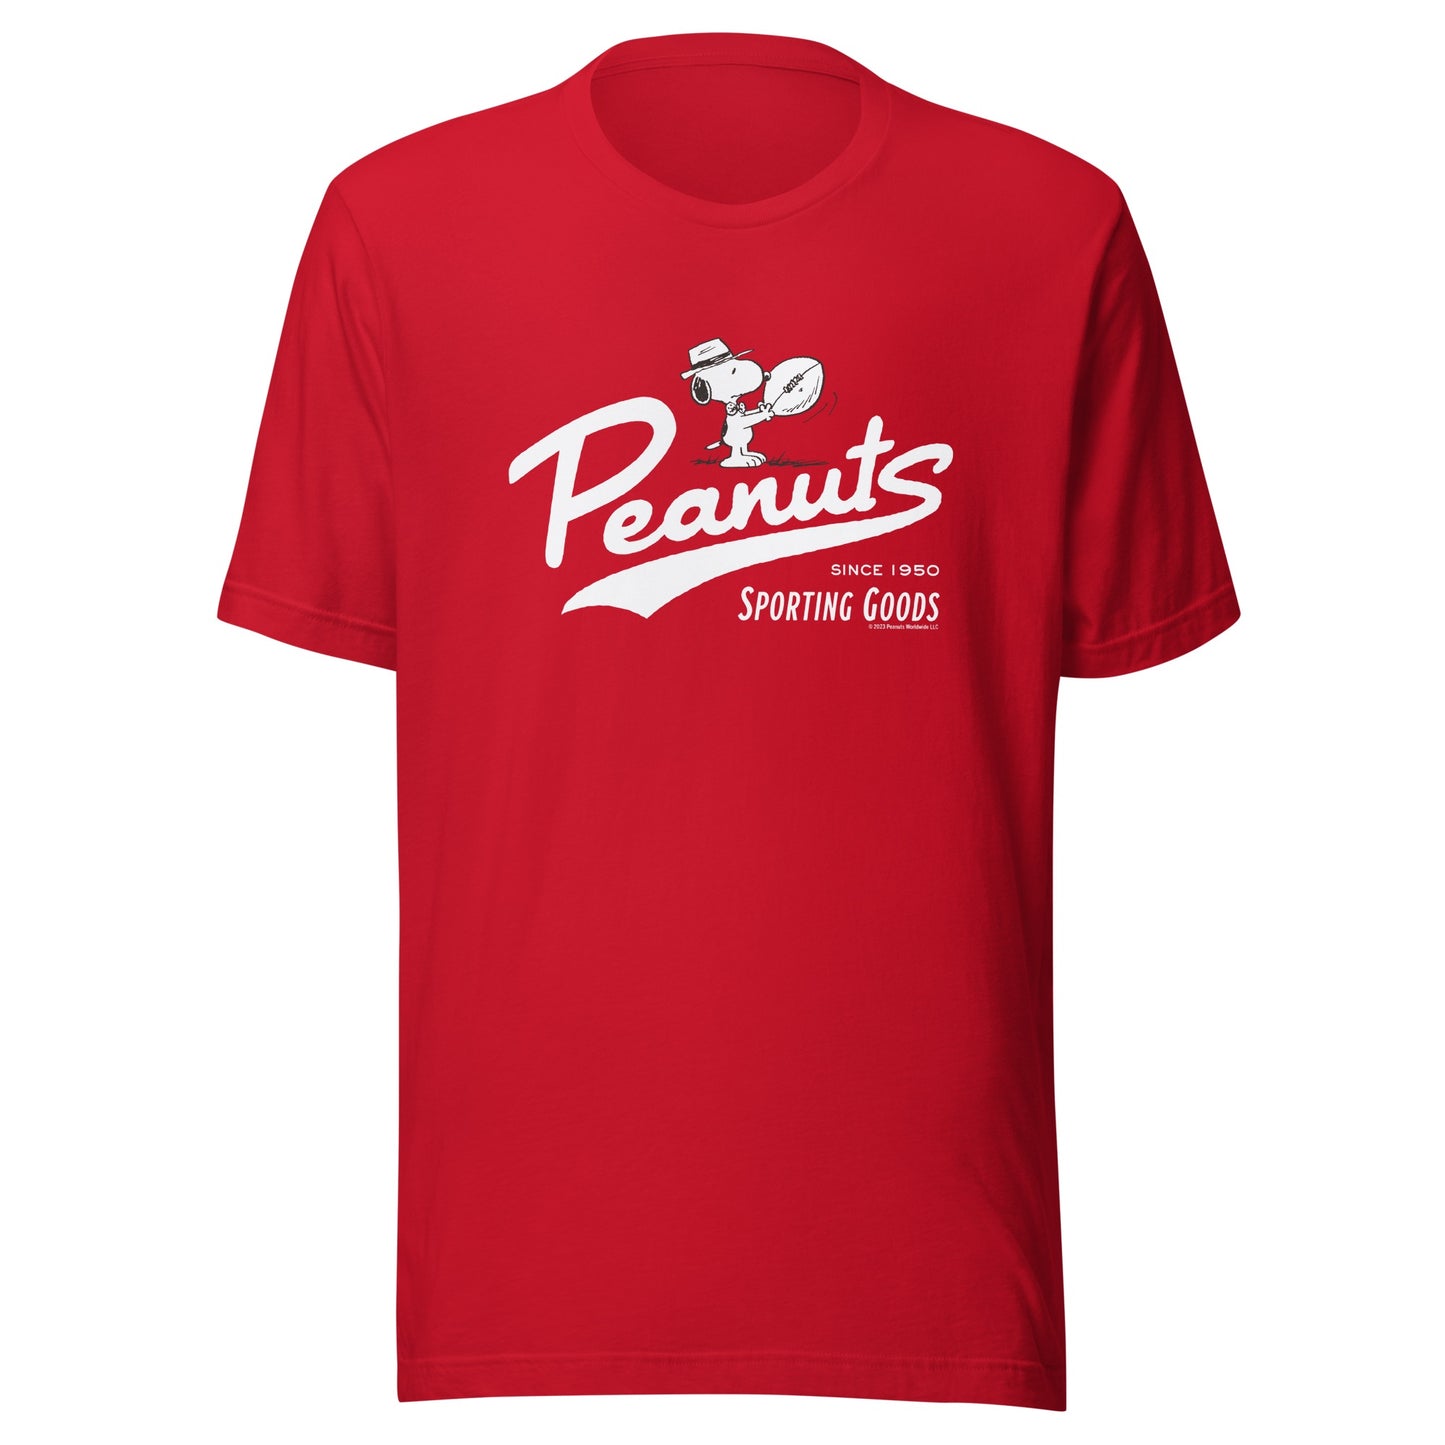 Peanuts Sporting Goods Snoopy Adult T-Shirt